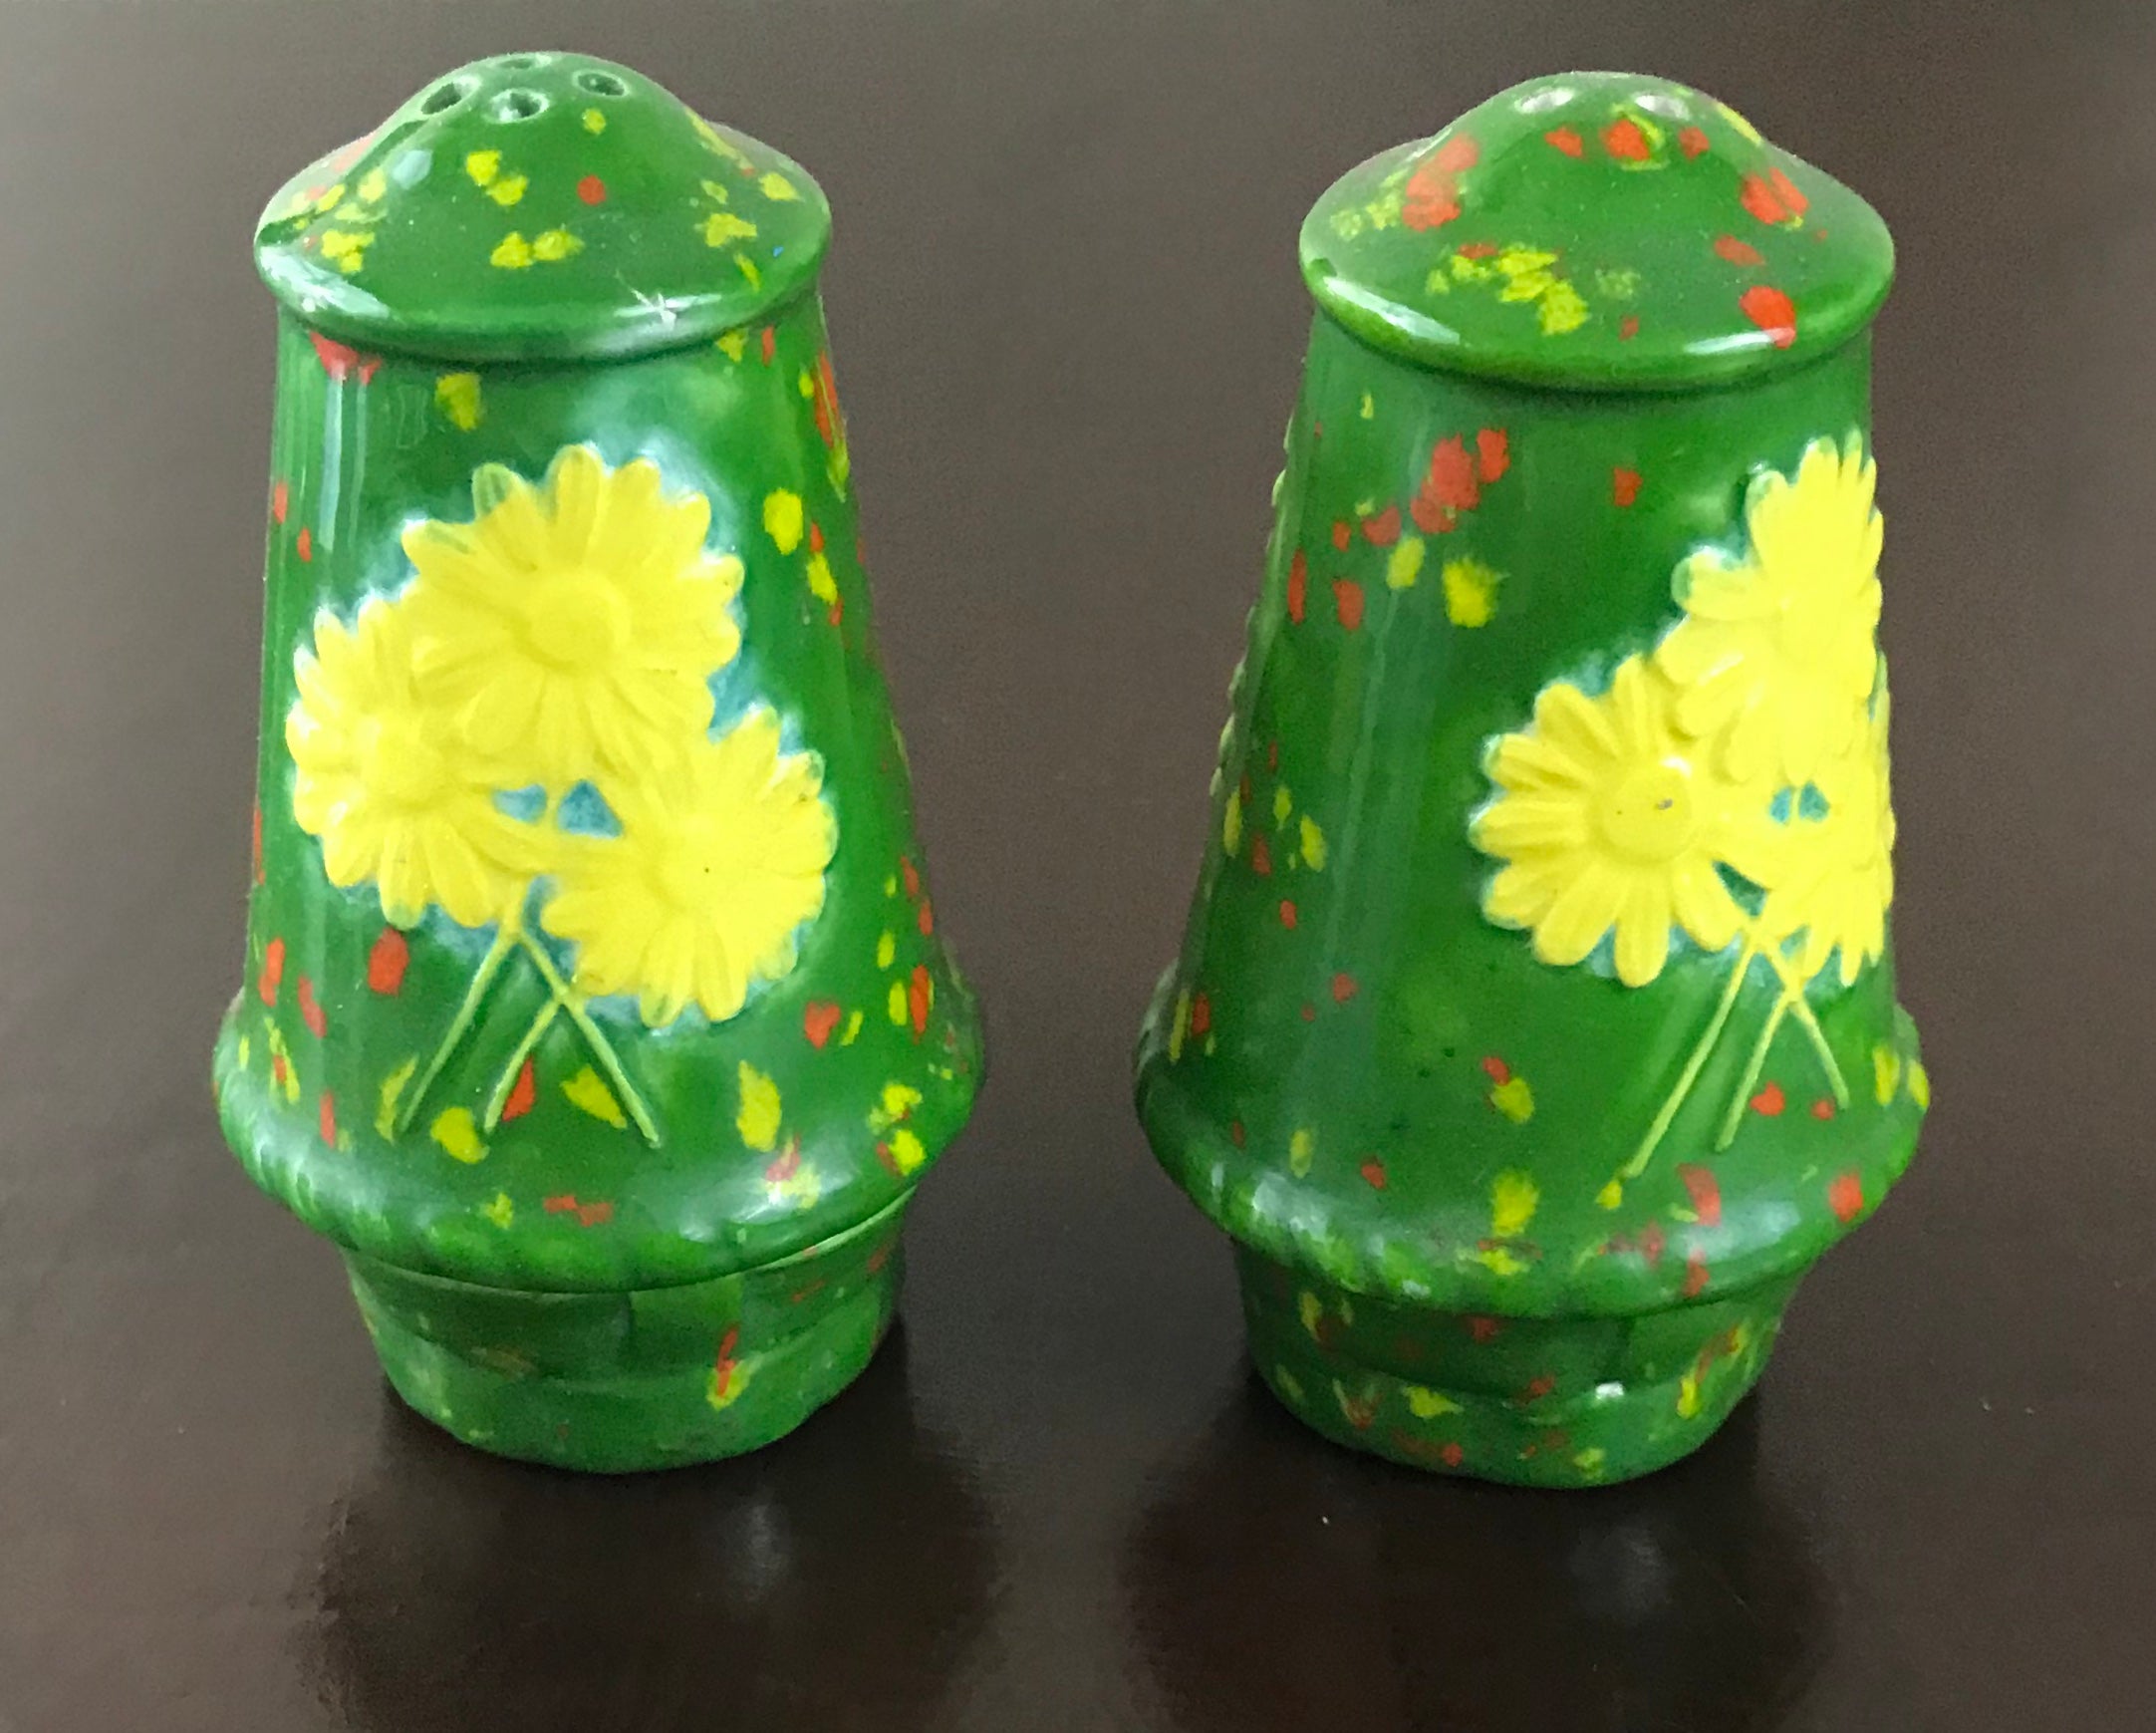 Vintage Ceramic Pottery Salt & Pepper Shakers Hand-painted Sunflower Daisy's Green Background Textured Details